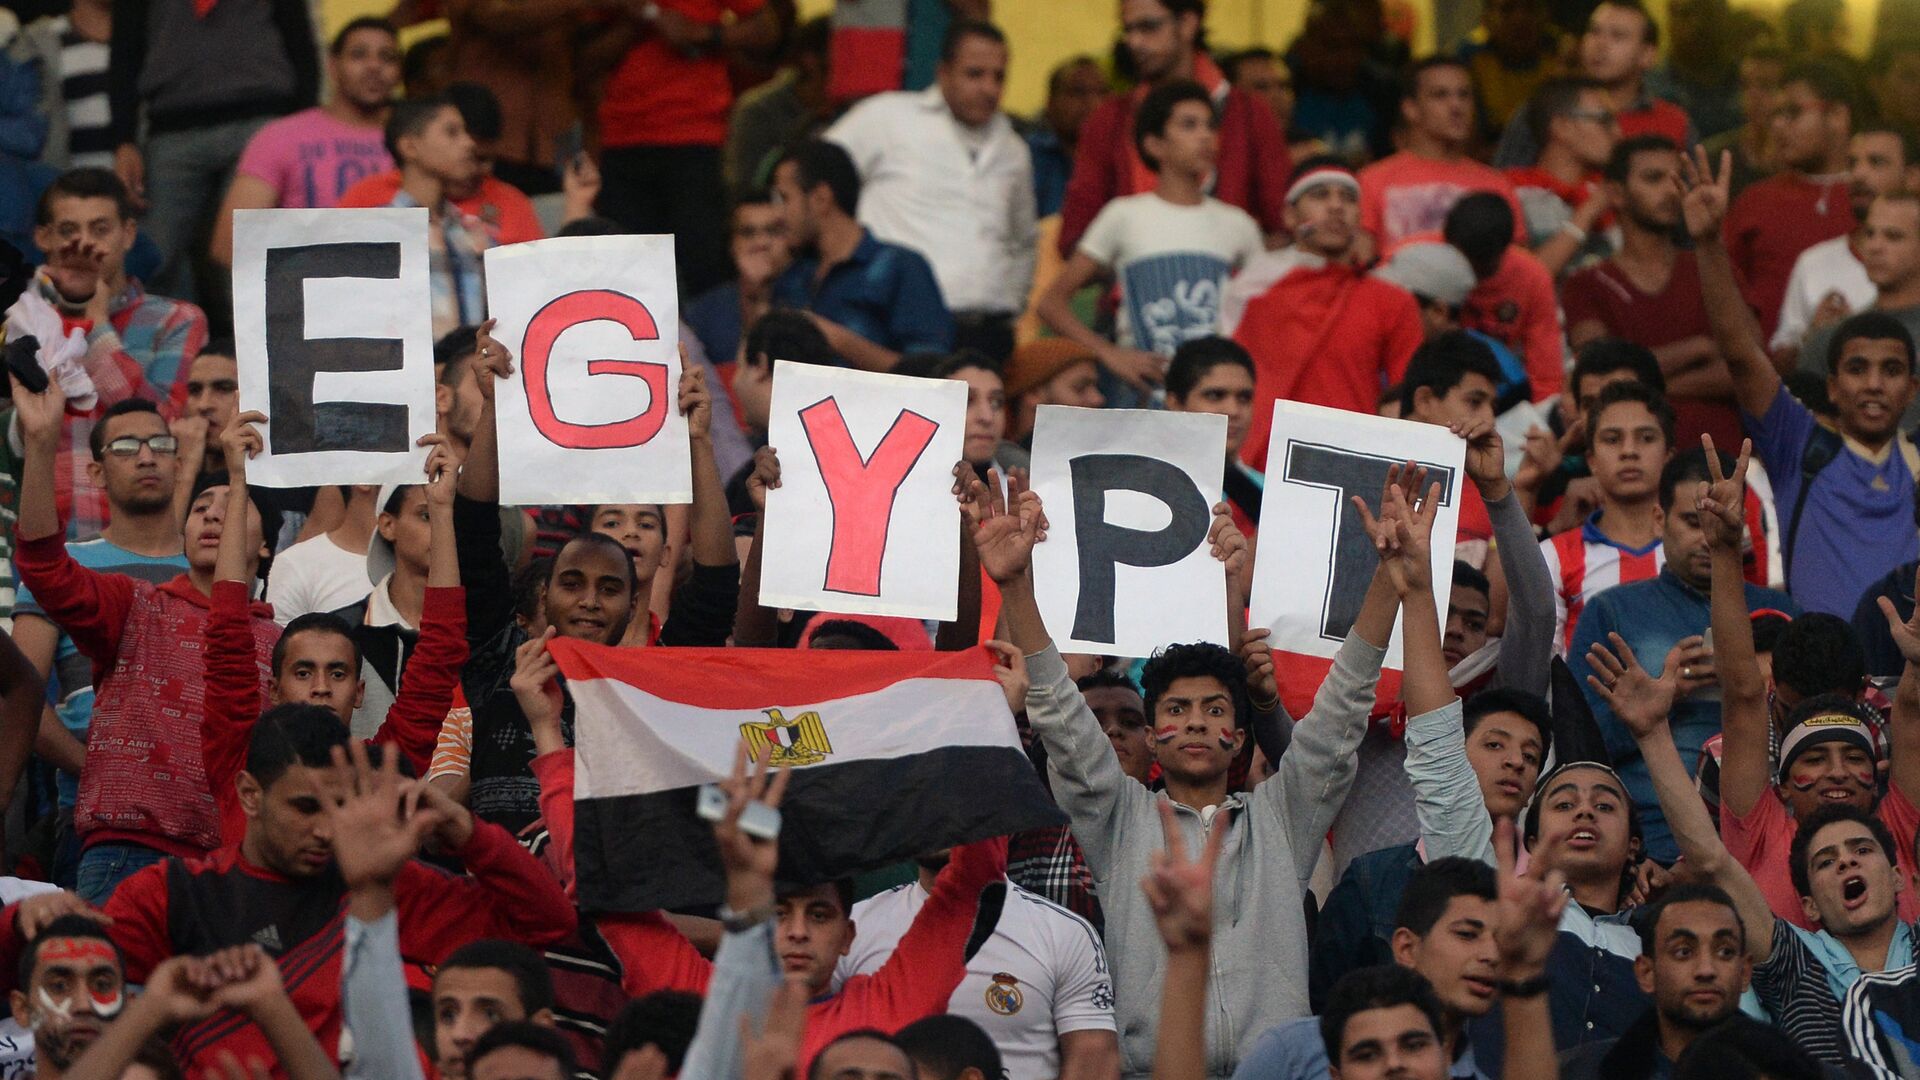 Egyptian fans carry placards and the national flag ahead of the match between Egypt and Senegal during the Africa Cup of Nations group G football match at the Cairo International Stadium in the Egyptian capital on November 15, 2014 - اسپوتنیک افغانستان  , 1920, 26.03.2022